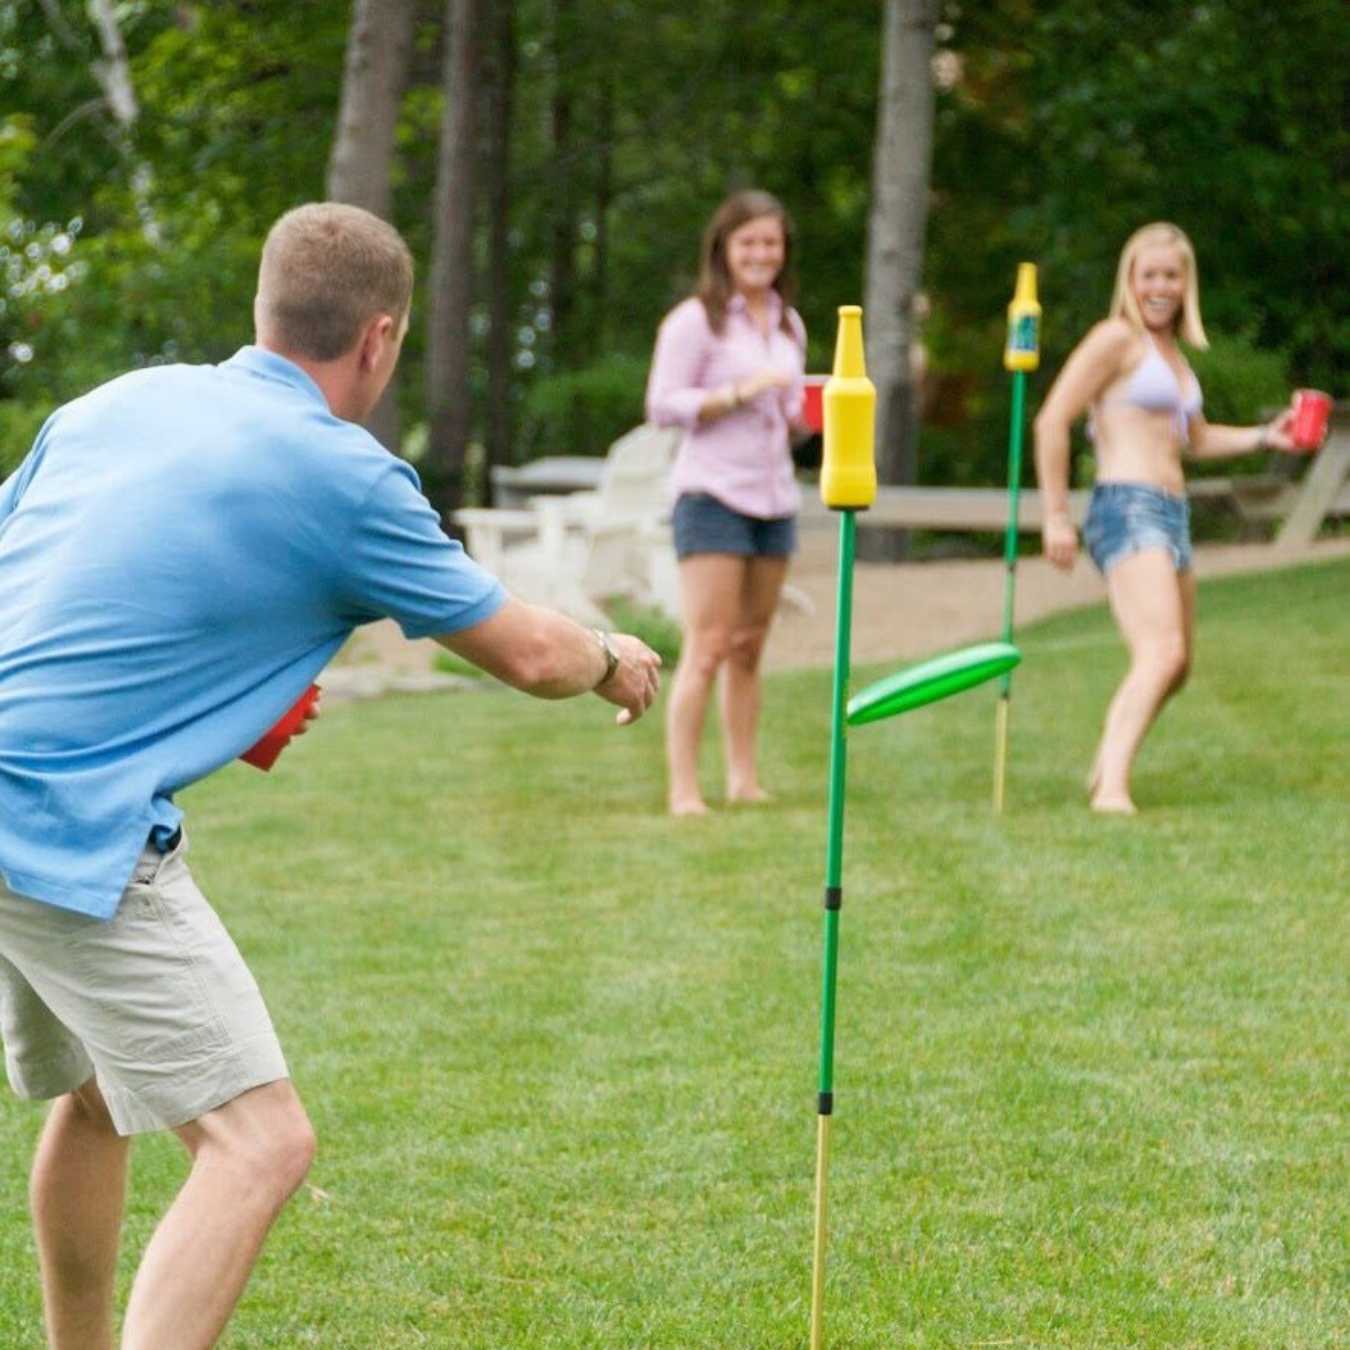 Frisbee Beer Game: How To Make